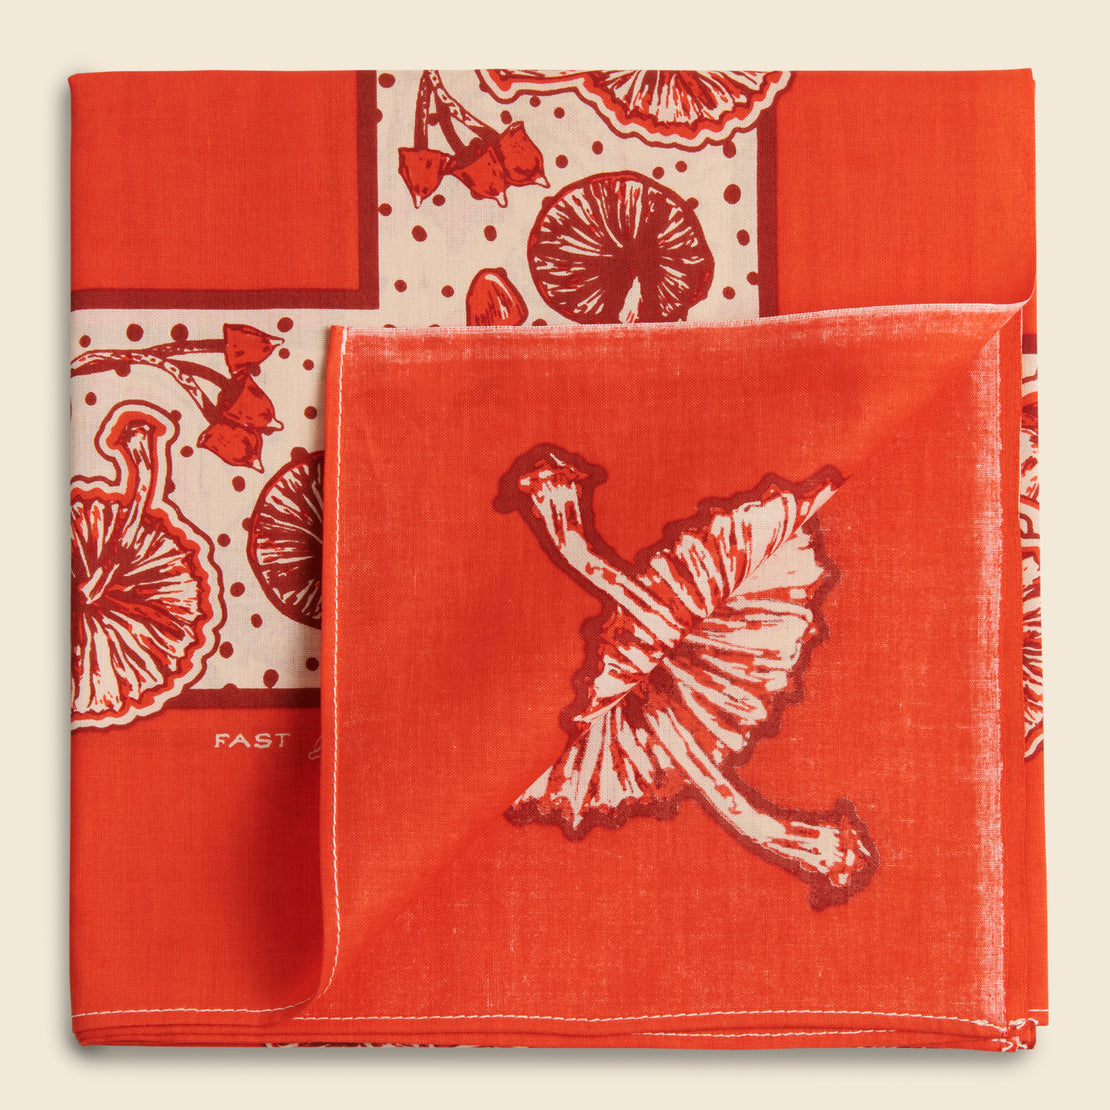 Sincerity XL Bandana - Tomato Soup - One Ear Brand - STAG Provisions - W - Accessories - Scarf